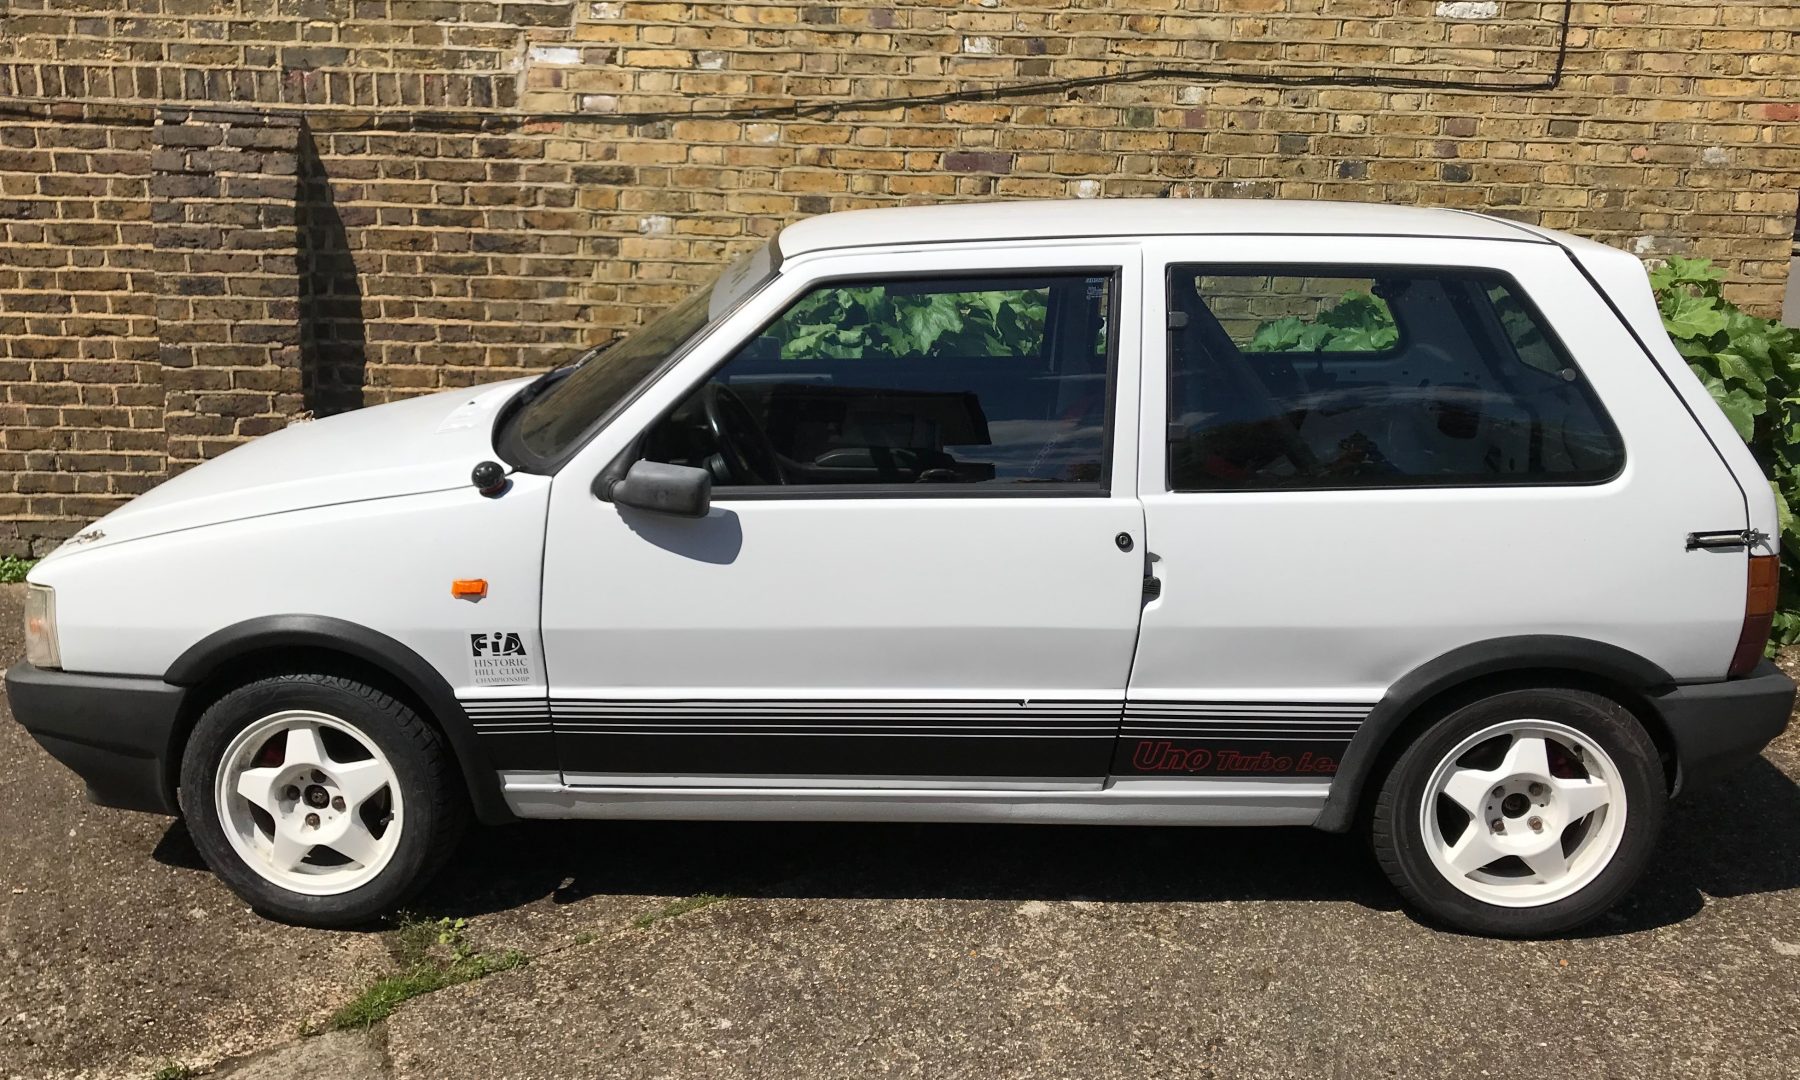 1988 Fiat Uno Turbo – Classified of the Week